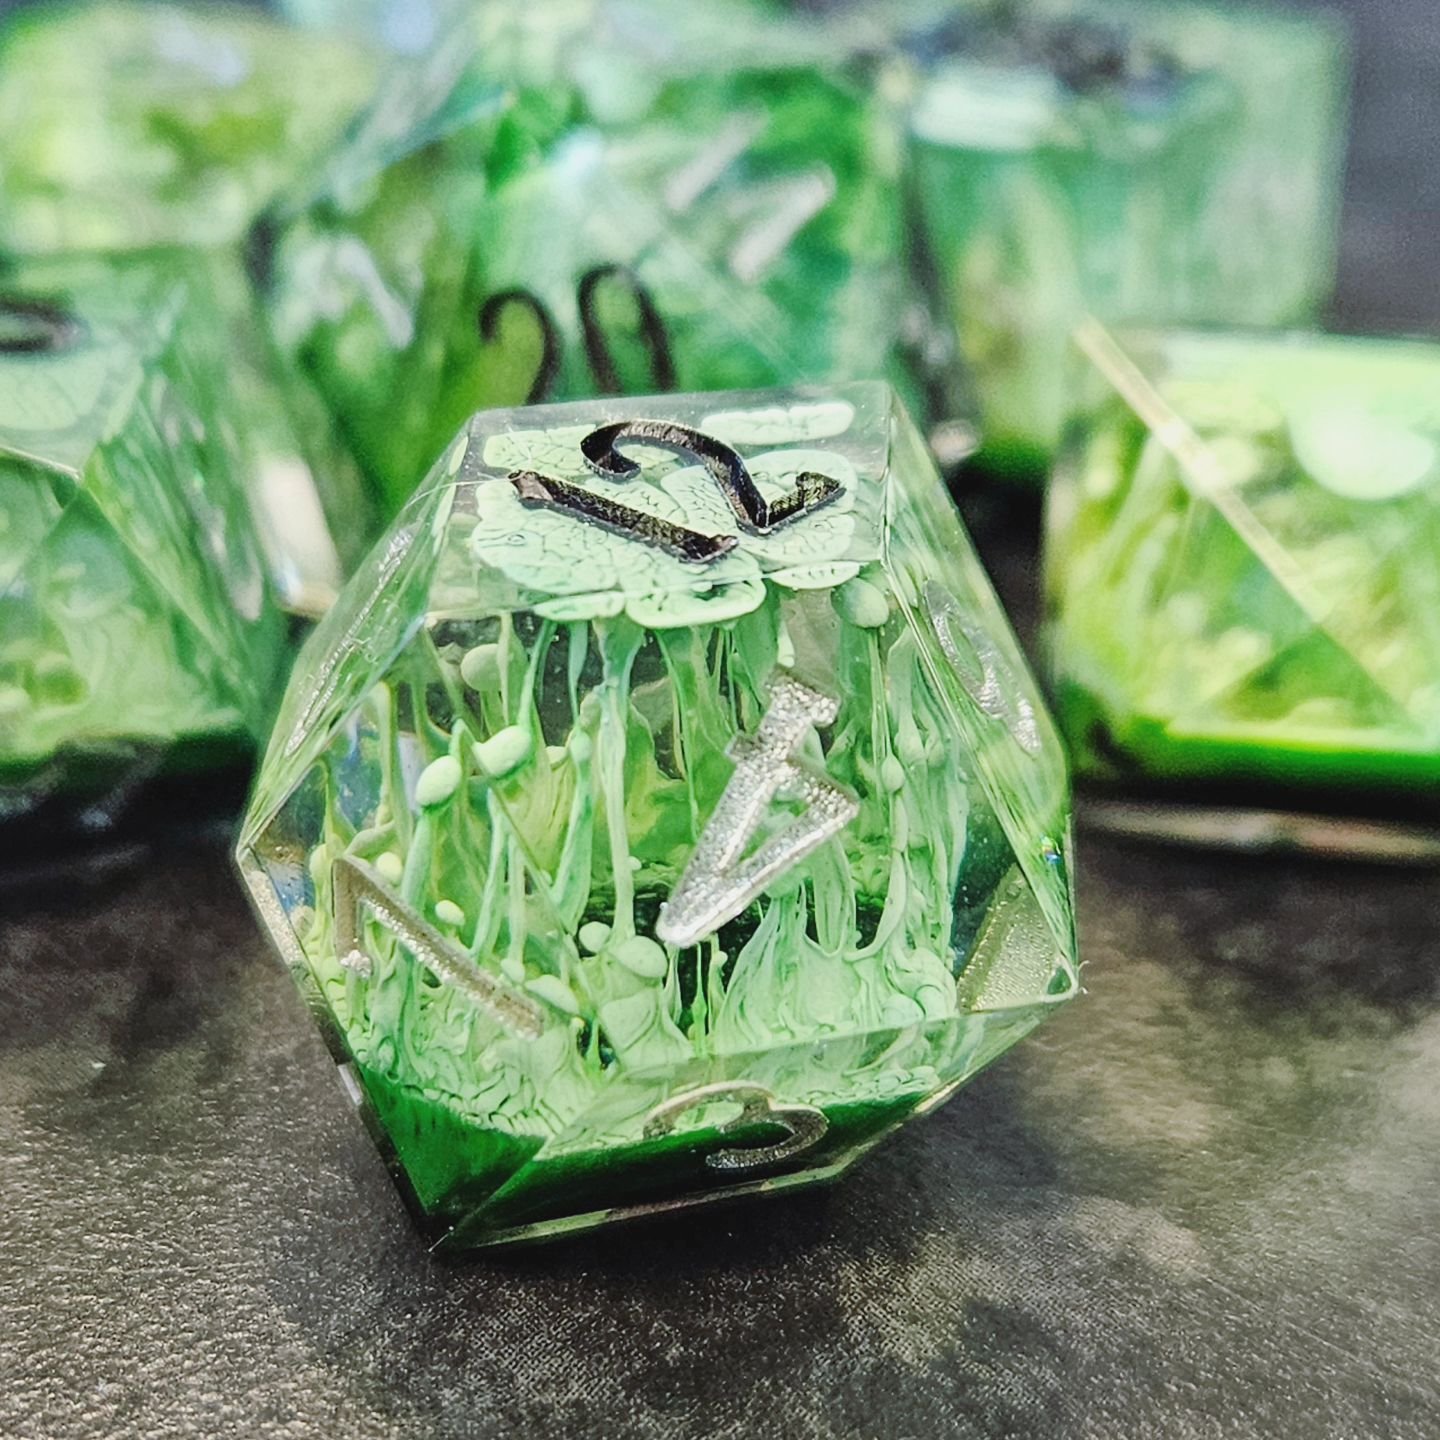 Lost in Lichen
Available in the next shop drop on Sunday the 28th of April at 6pm BST!
&deg;
#dice  #diceset #dicemaking #dicegoblin #dnddice #dnd5e #dnd